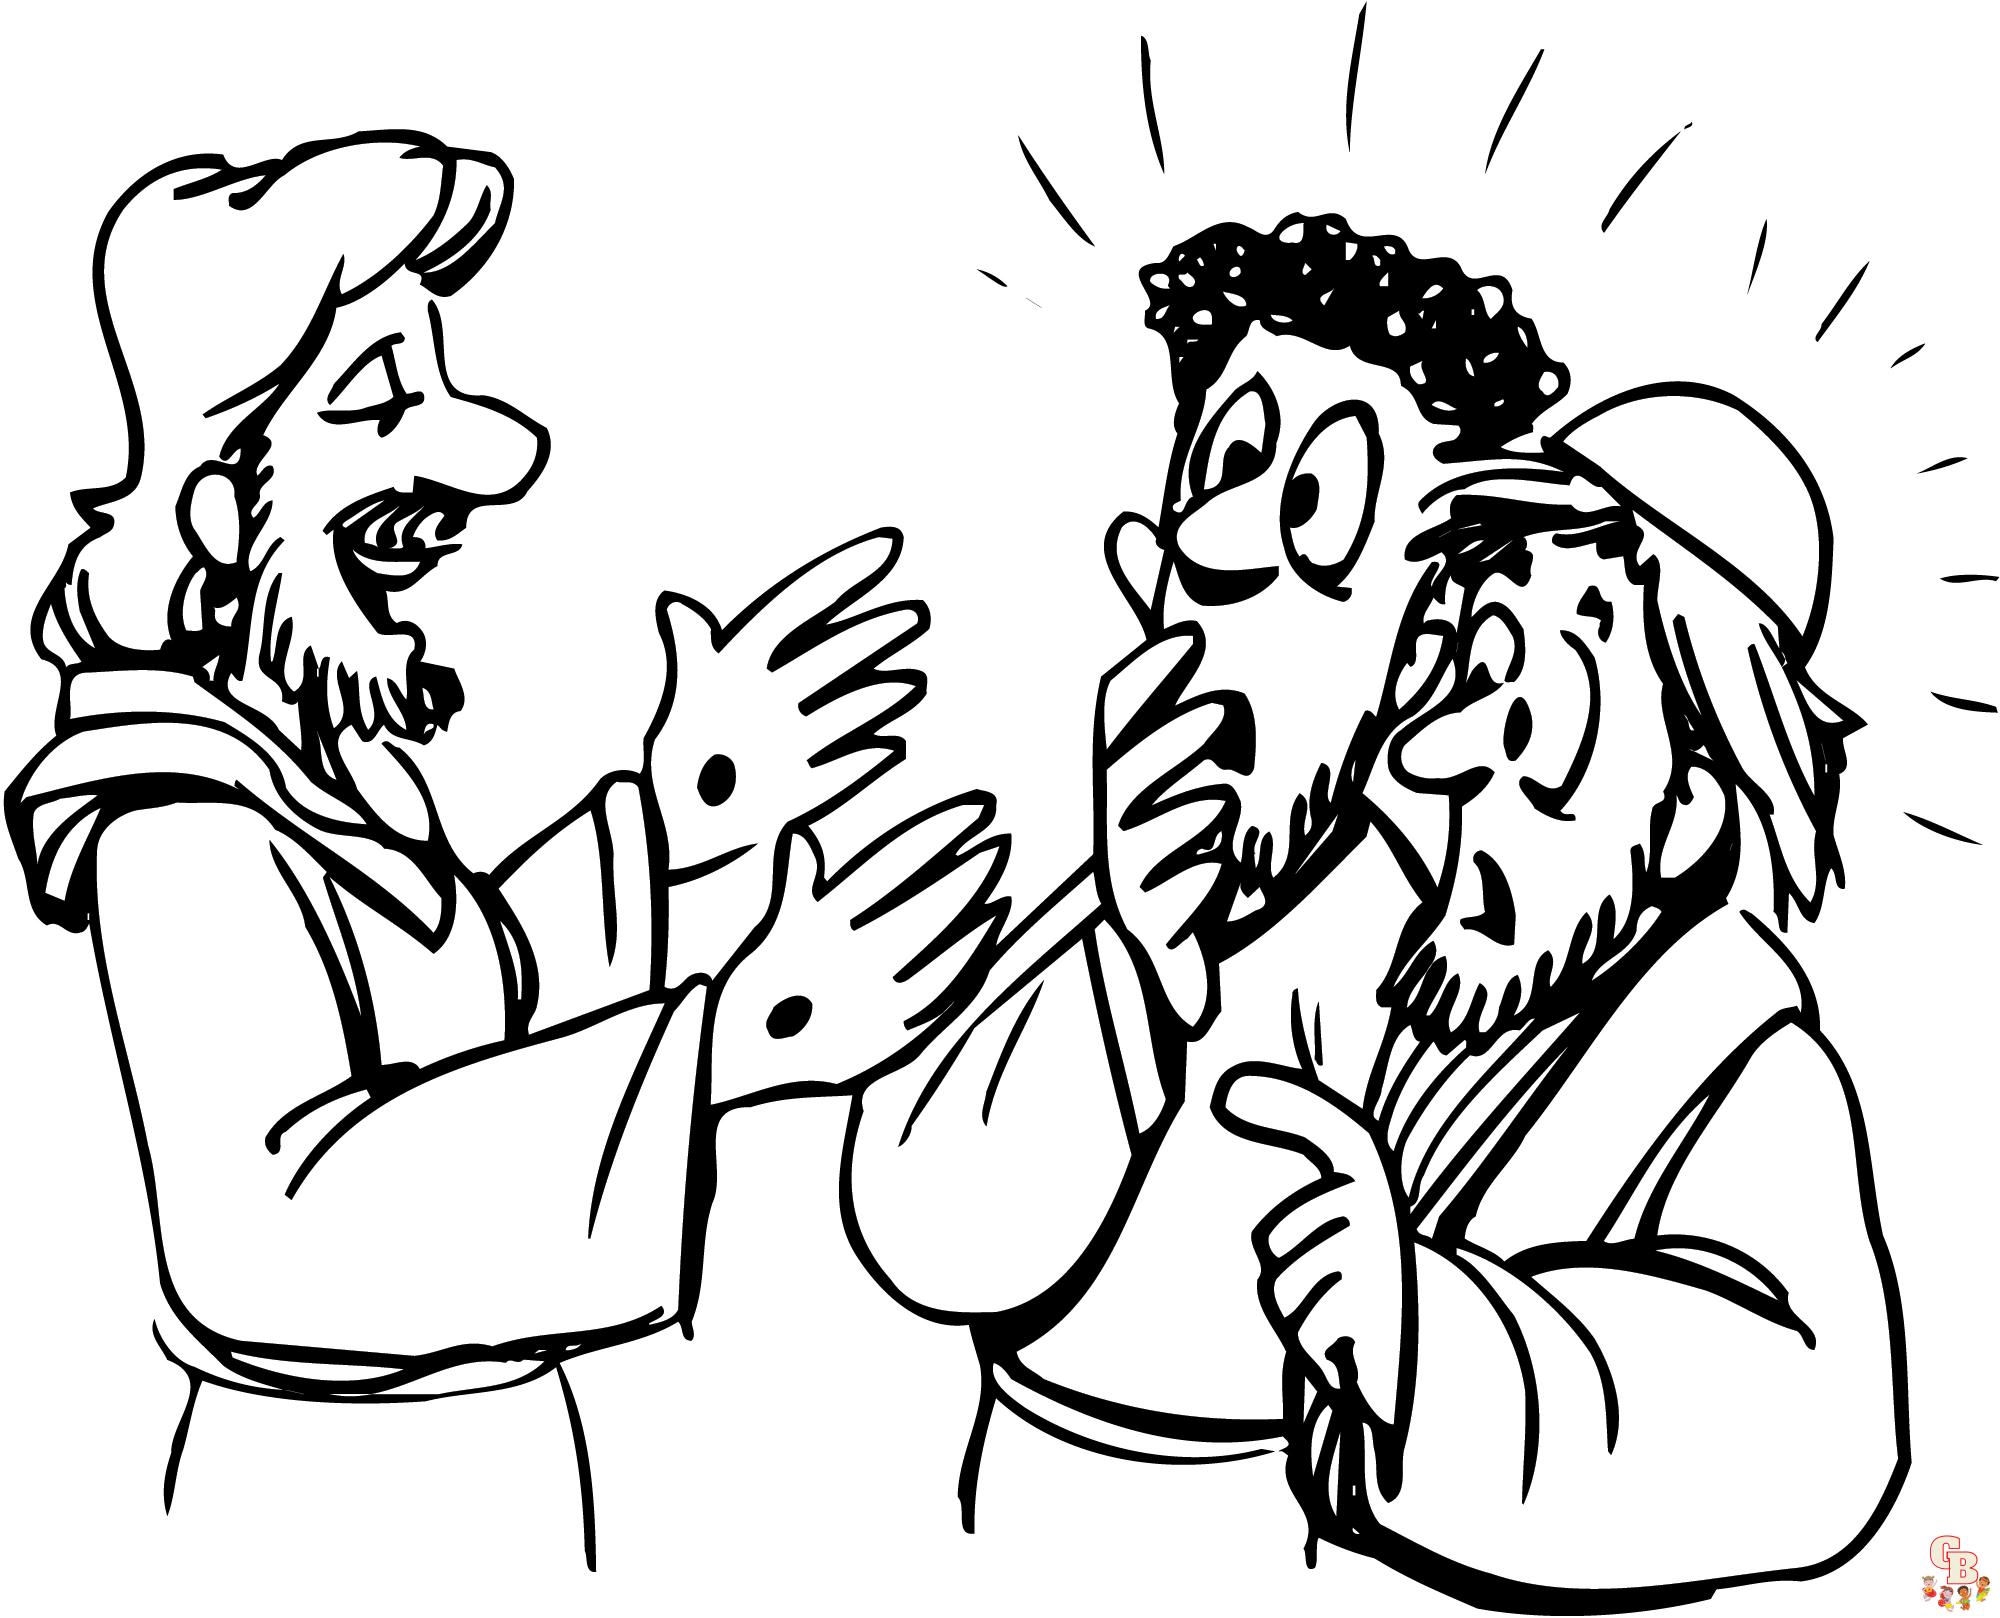 Empty Tomb Coloring Pages 2